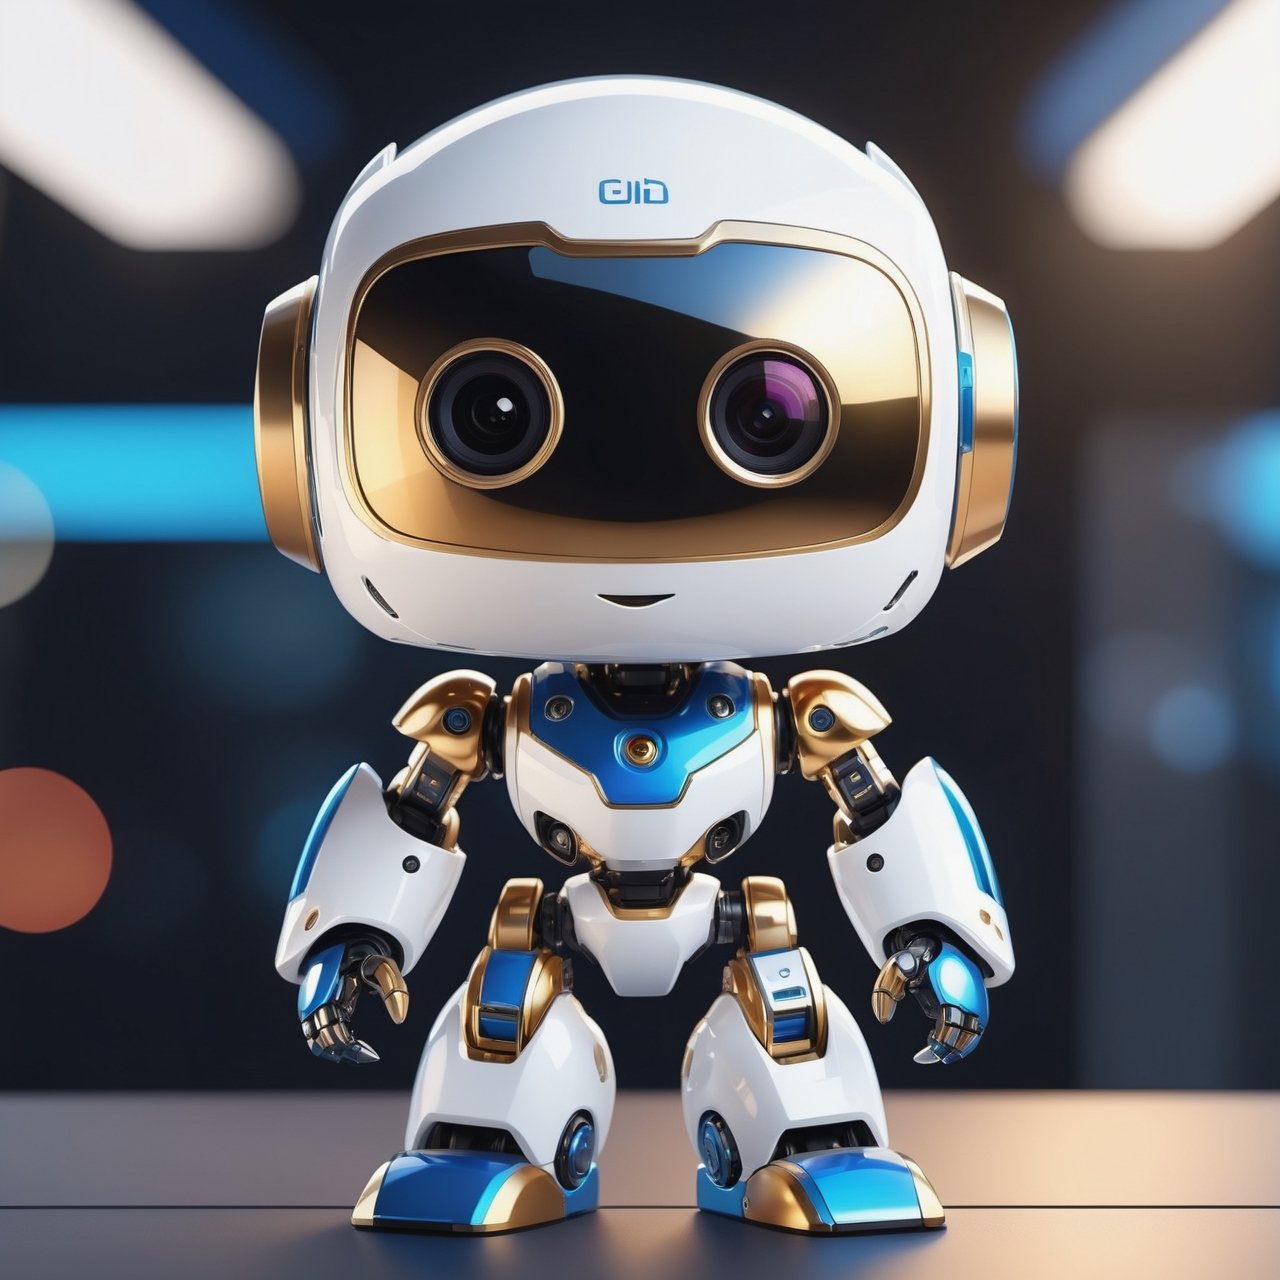 (masterpiece:1.2, highest quality), (realistic, photo_realistic:1.9)
1chibi_robot, Cute chibi robot, happy face, Designer look holding a paintbrush in one hand, white with blue, (detailed background), (gradients), colorful, detailed landscape, visual key, shiny skin. Modern place, Action camera. Portrait film. Standard lens. Golden hour lighting.
sharp focus, 8k, UHD, high quality, frowning, intricate detailed, highly detailed, hyper-realistic,interior,robot white with blue,chibi emote style,Monster